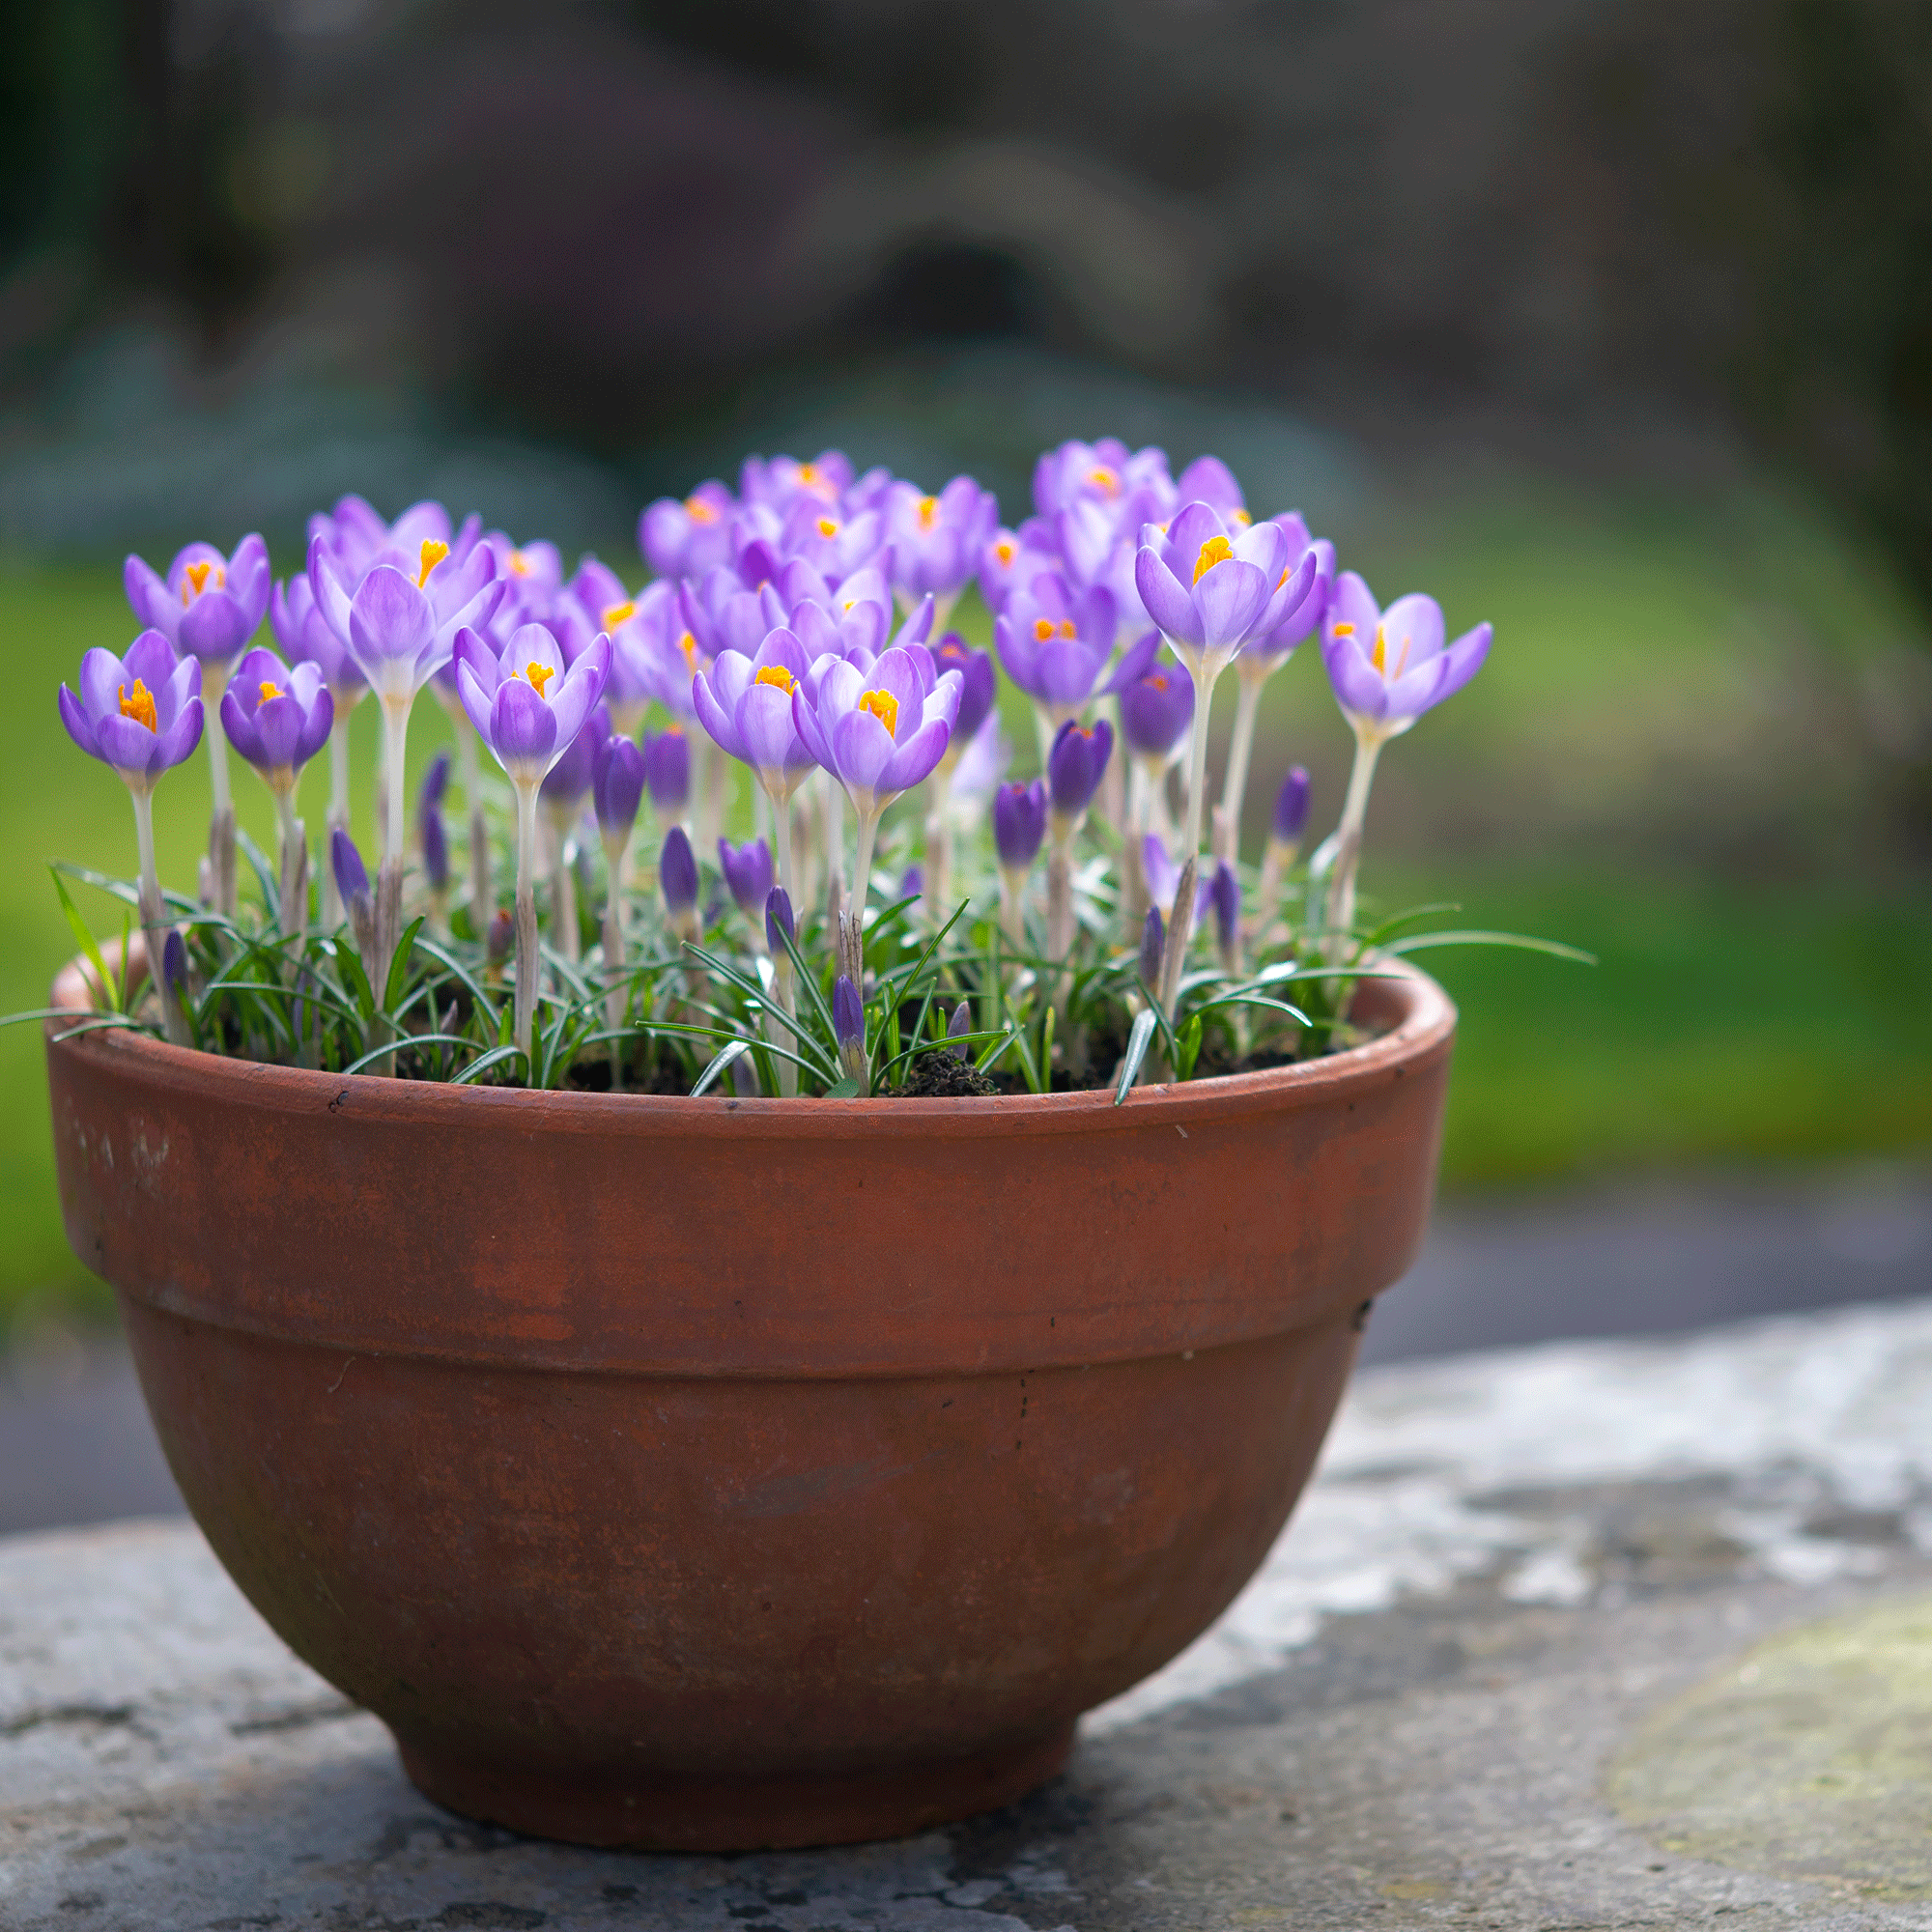 When to plant crocus bulbs - get the timing right for a glorious February display